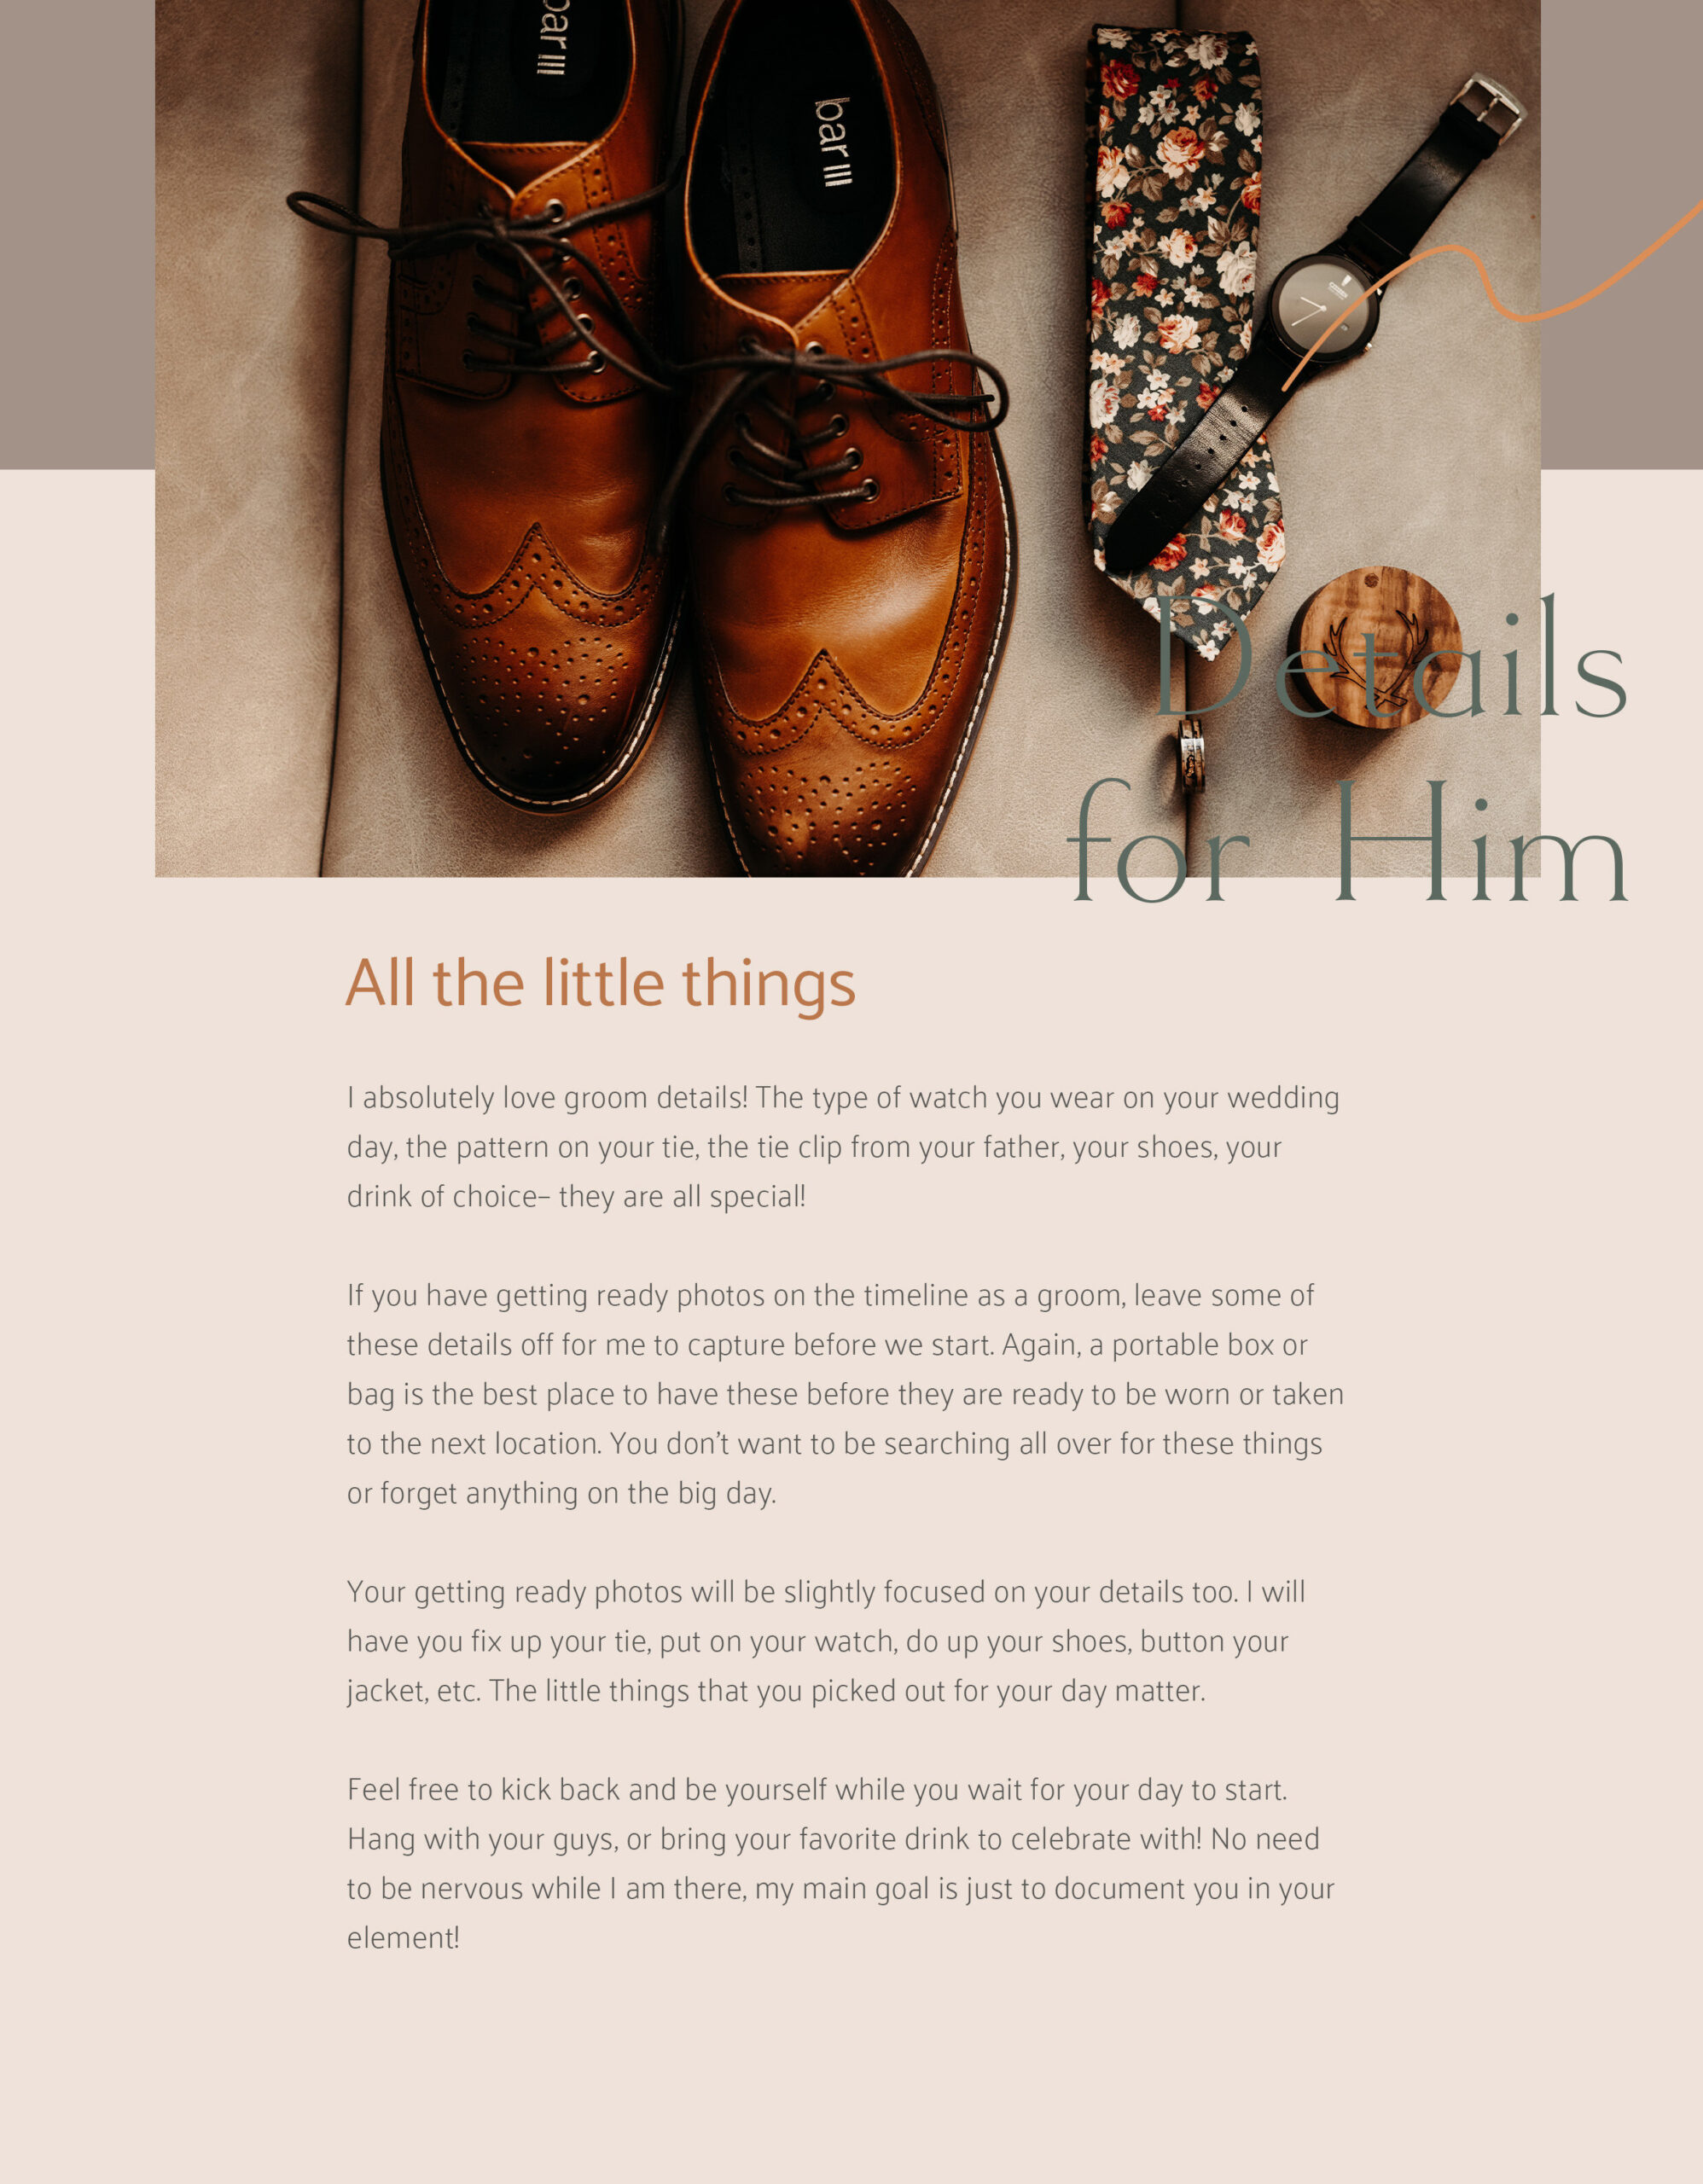 BLP Wedding Day Details Style Guide (DONE)_0009_Pg 10 - Details For Him.jpg